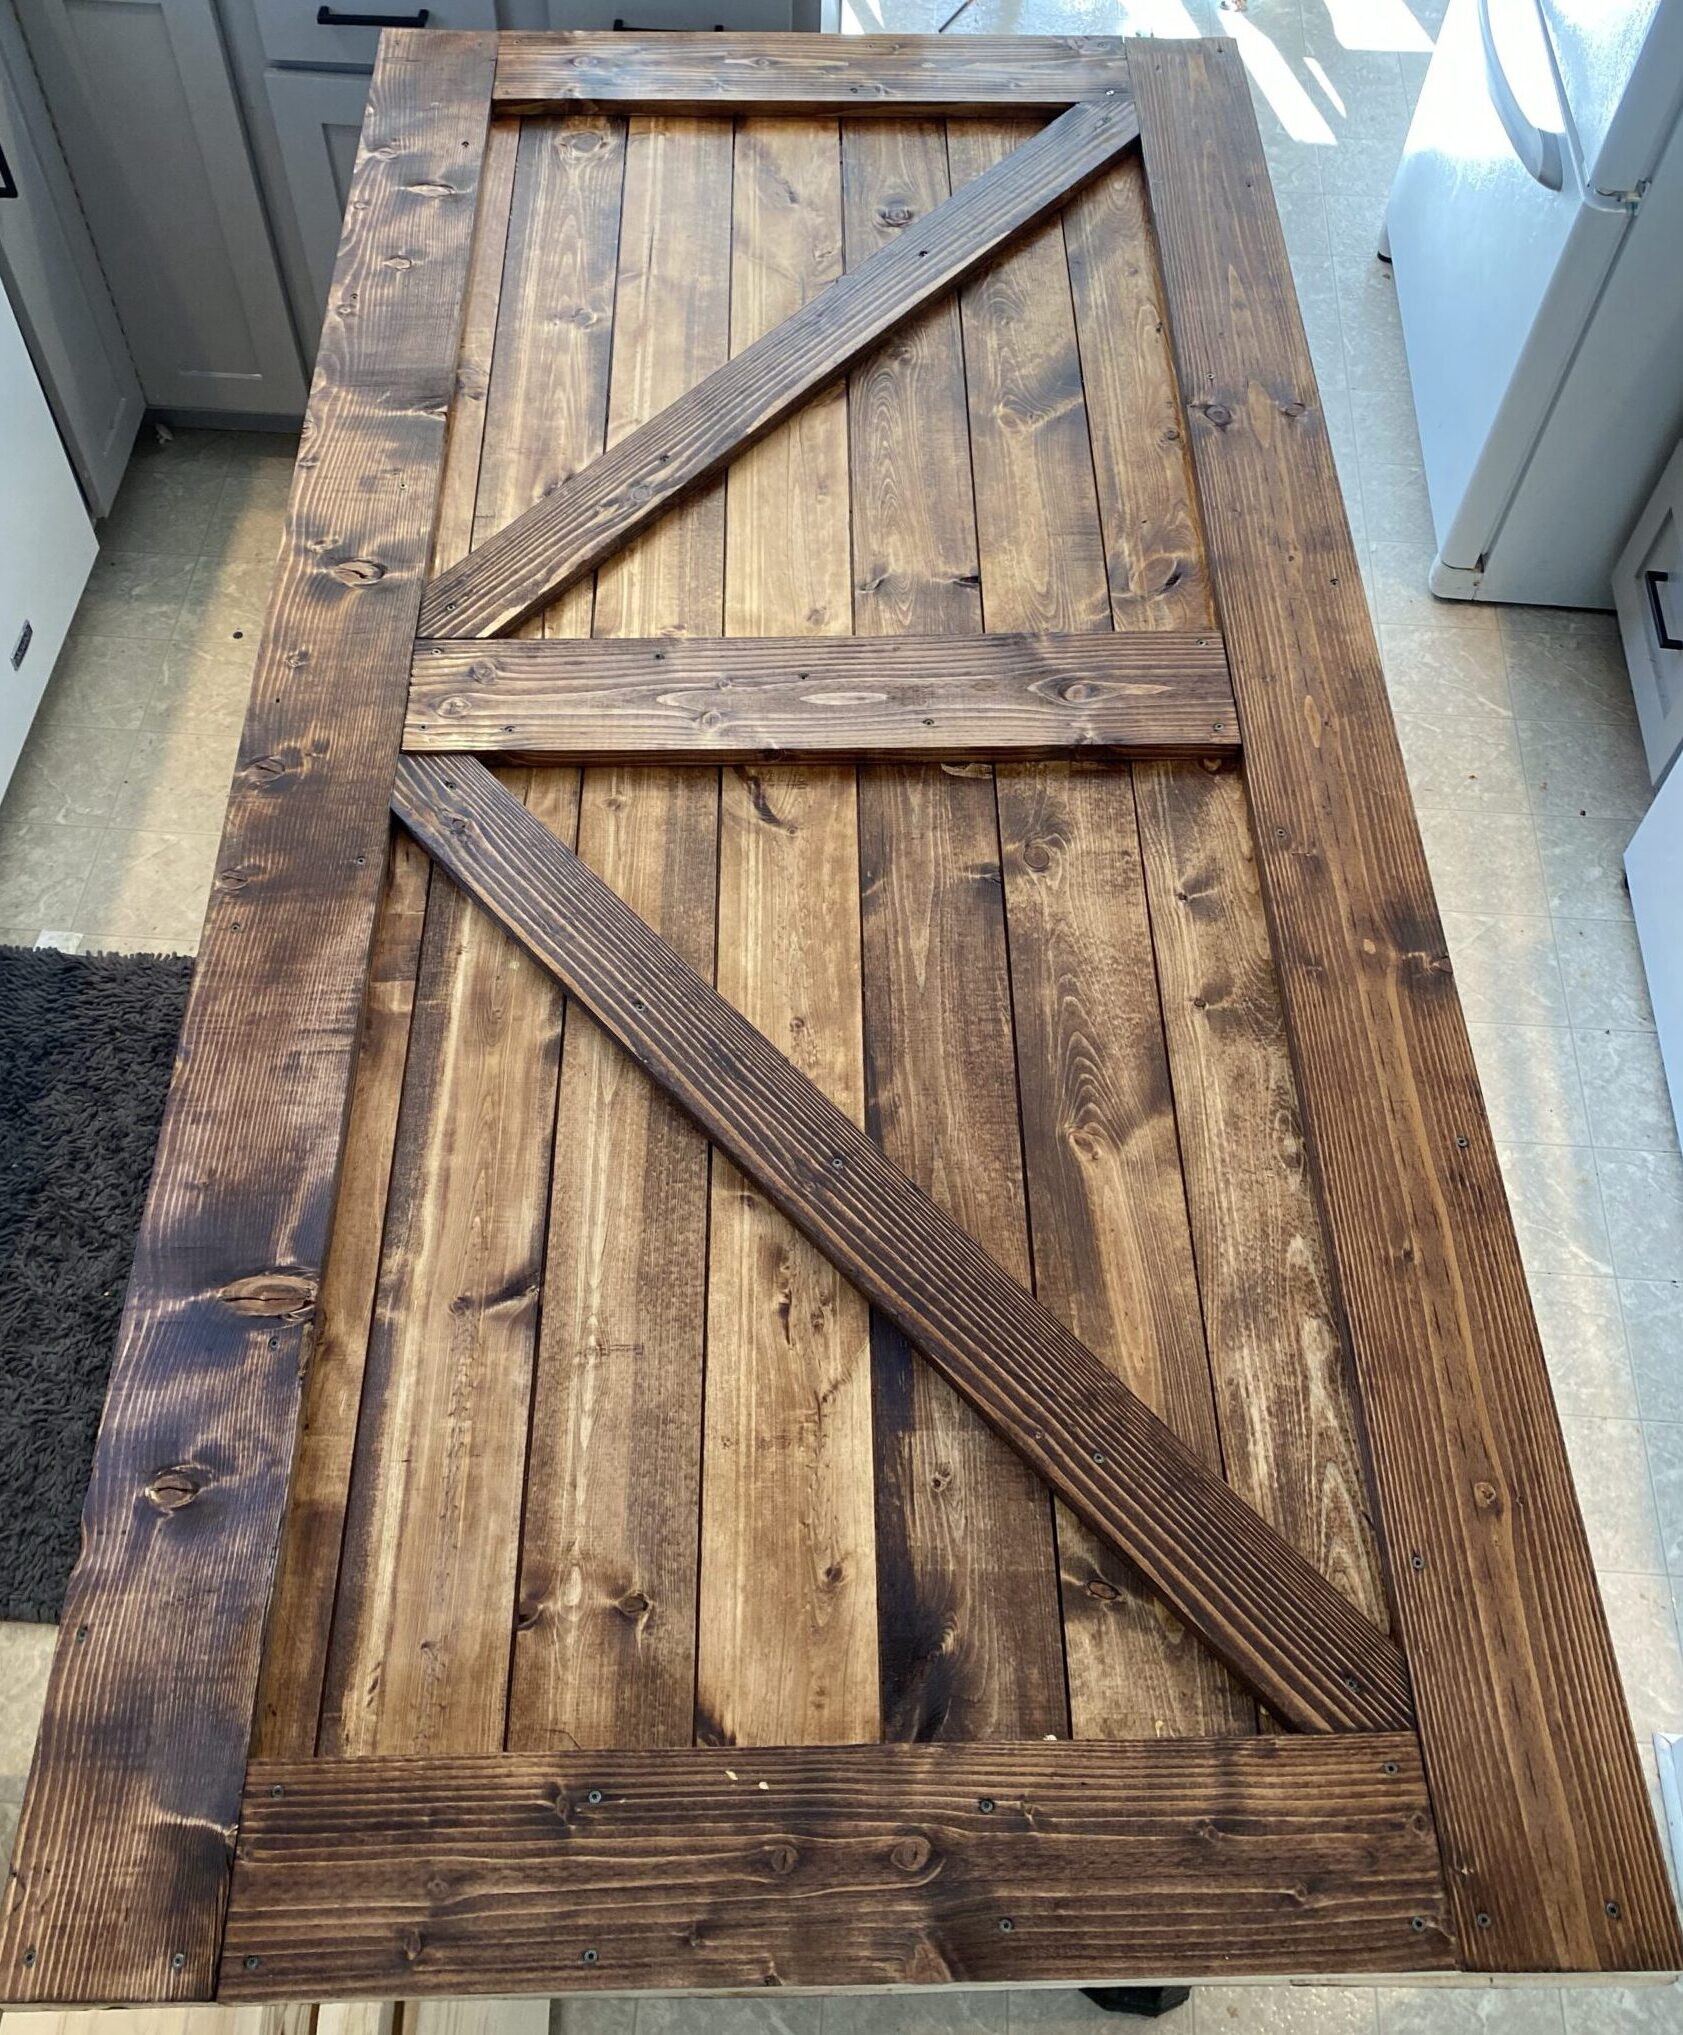 How to build a classic K-style barn door